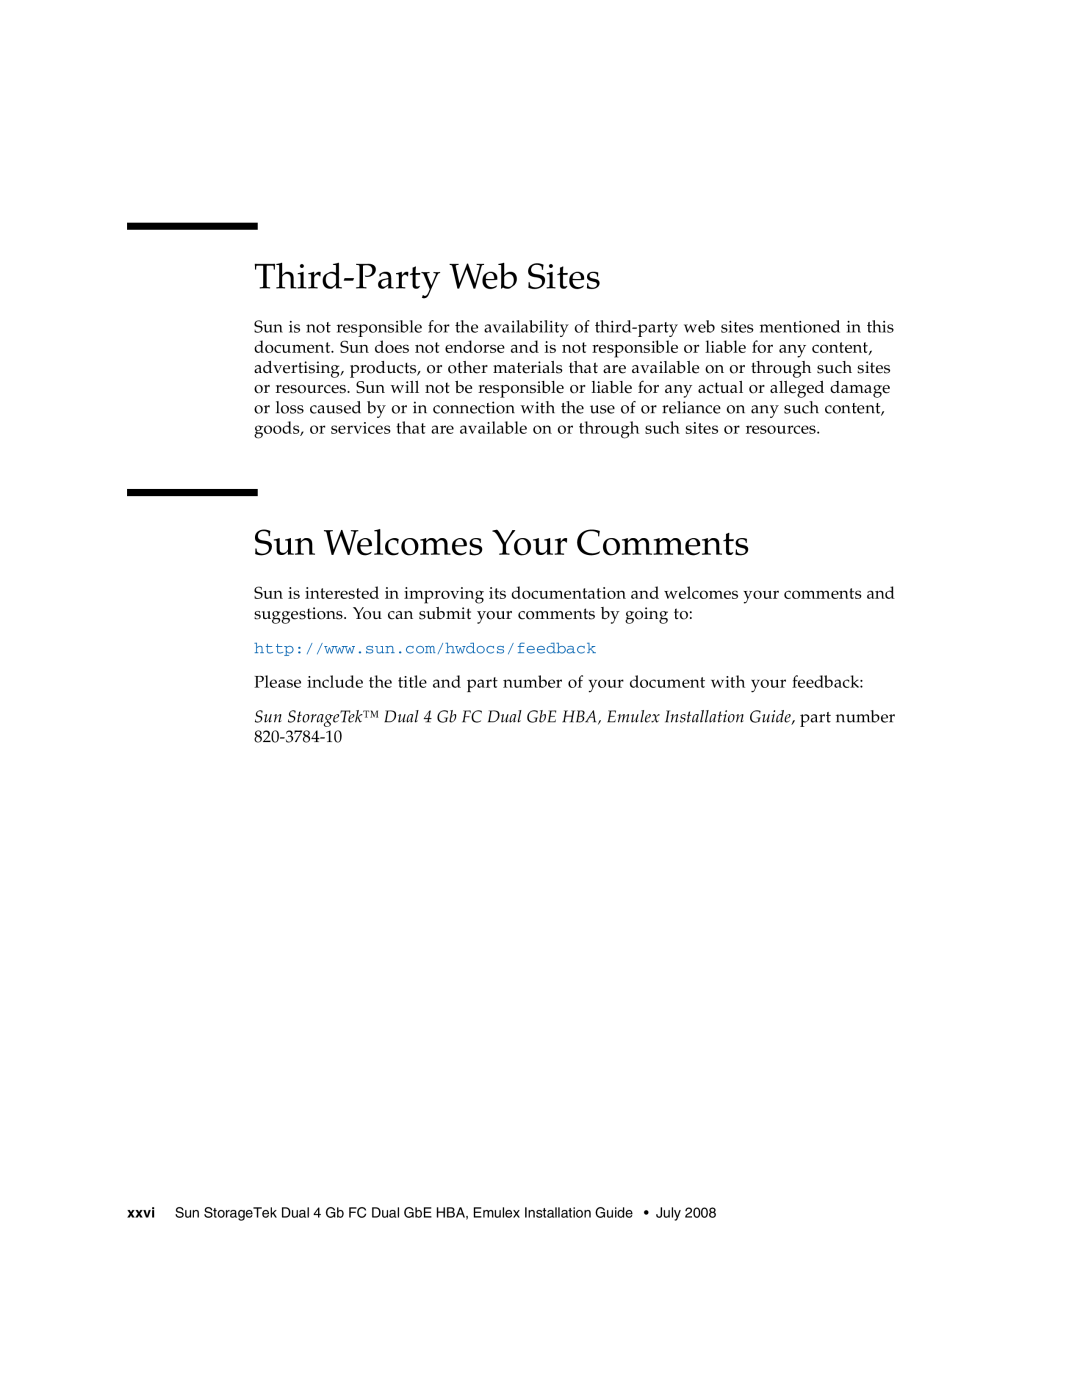 Sun Microsystems SG-XPCIE2FCGBE-E-Z manual Third-Party Web Sites, Sun Welcomes Your Comments 